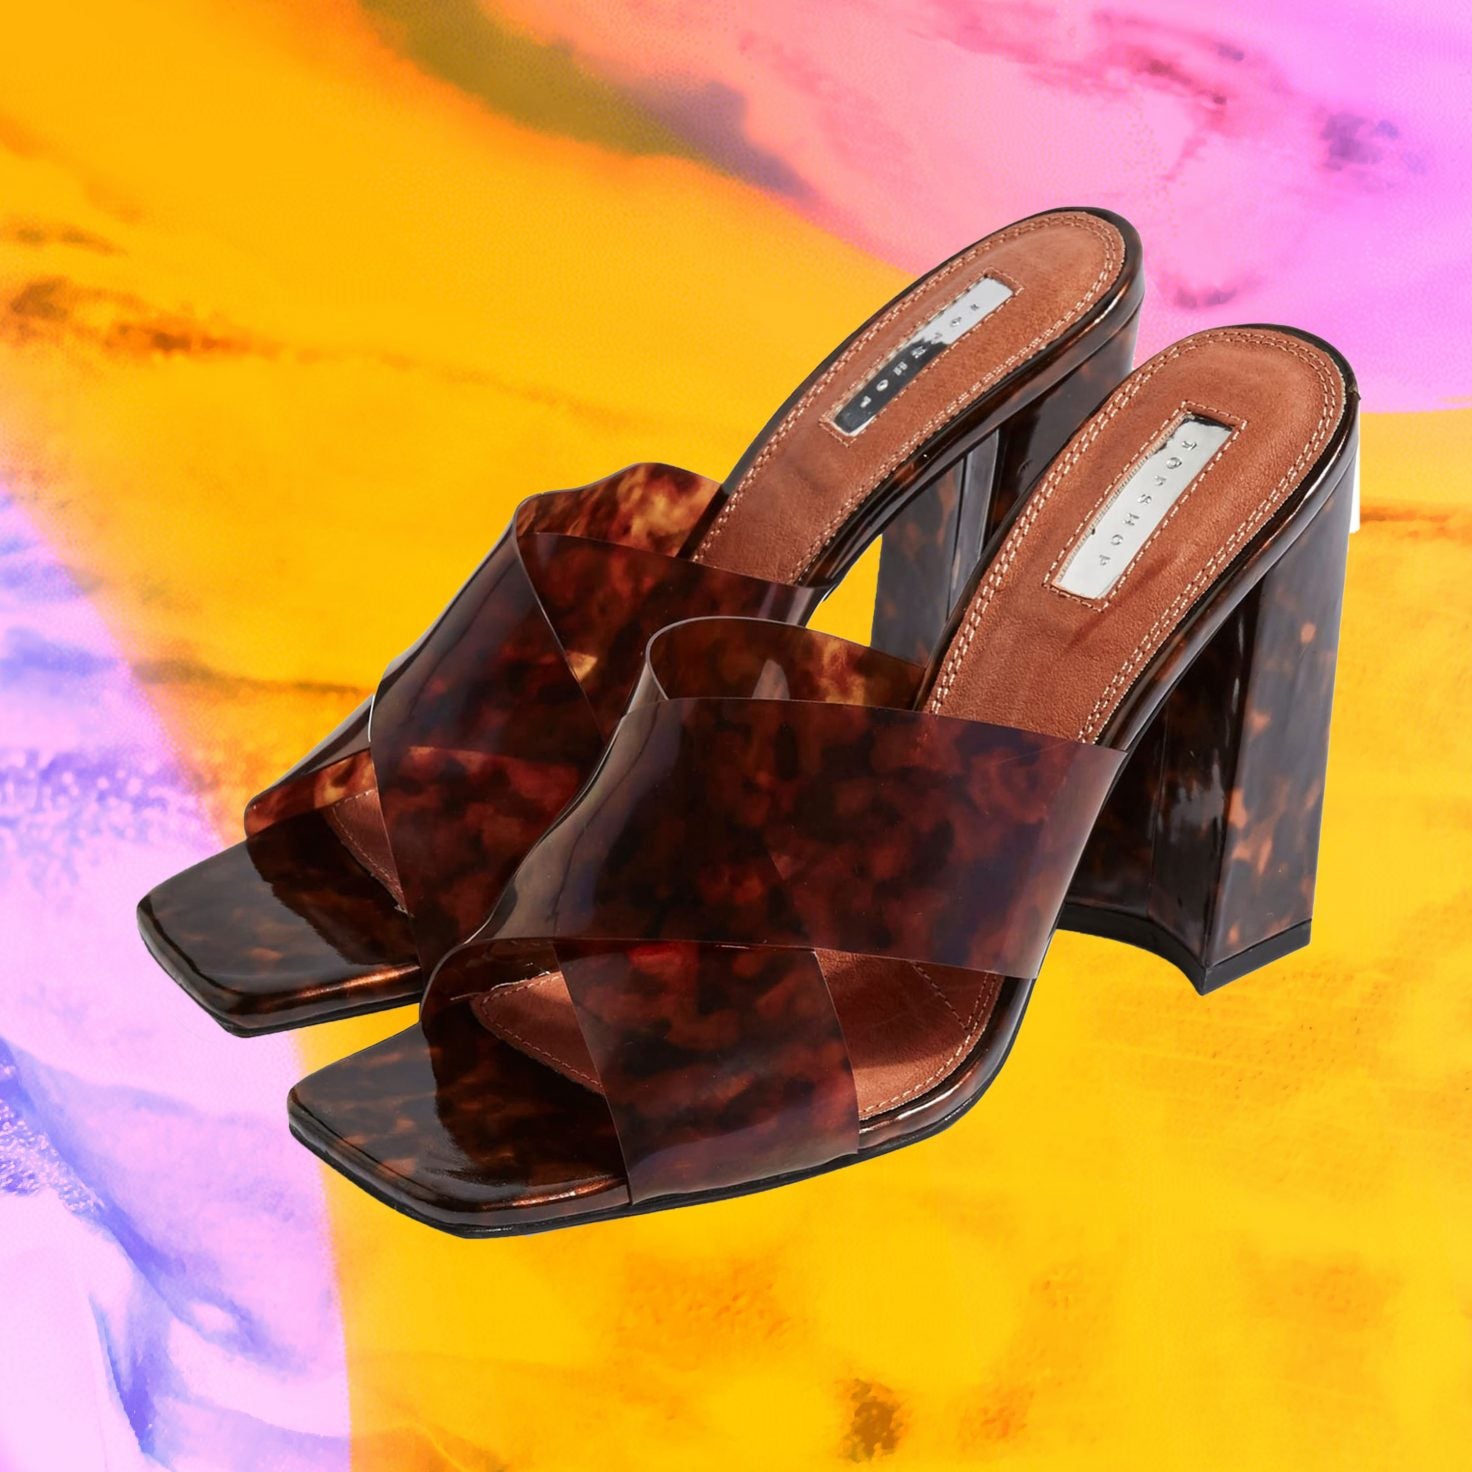 Your ESSENCE Festival Won't Be Complete Without These Statement Heels